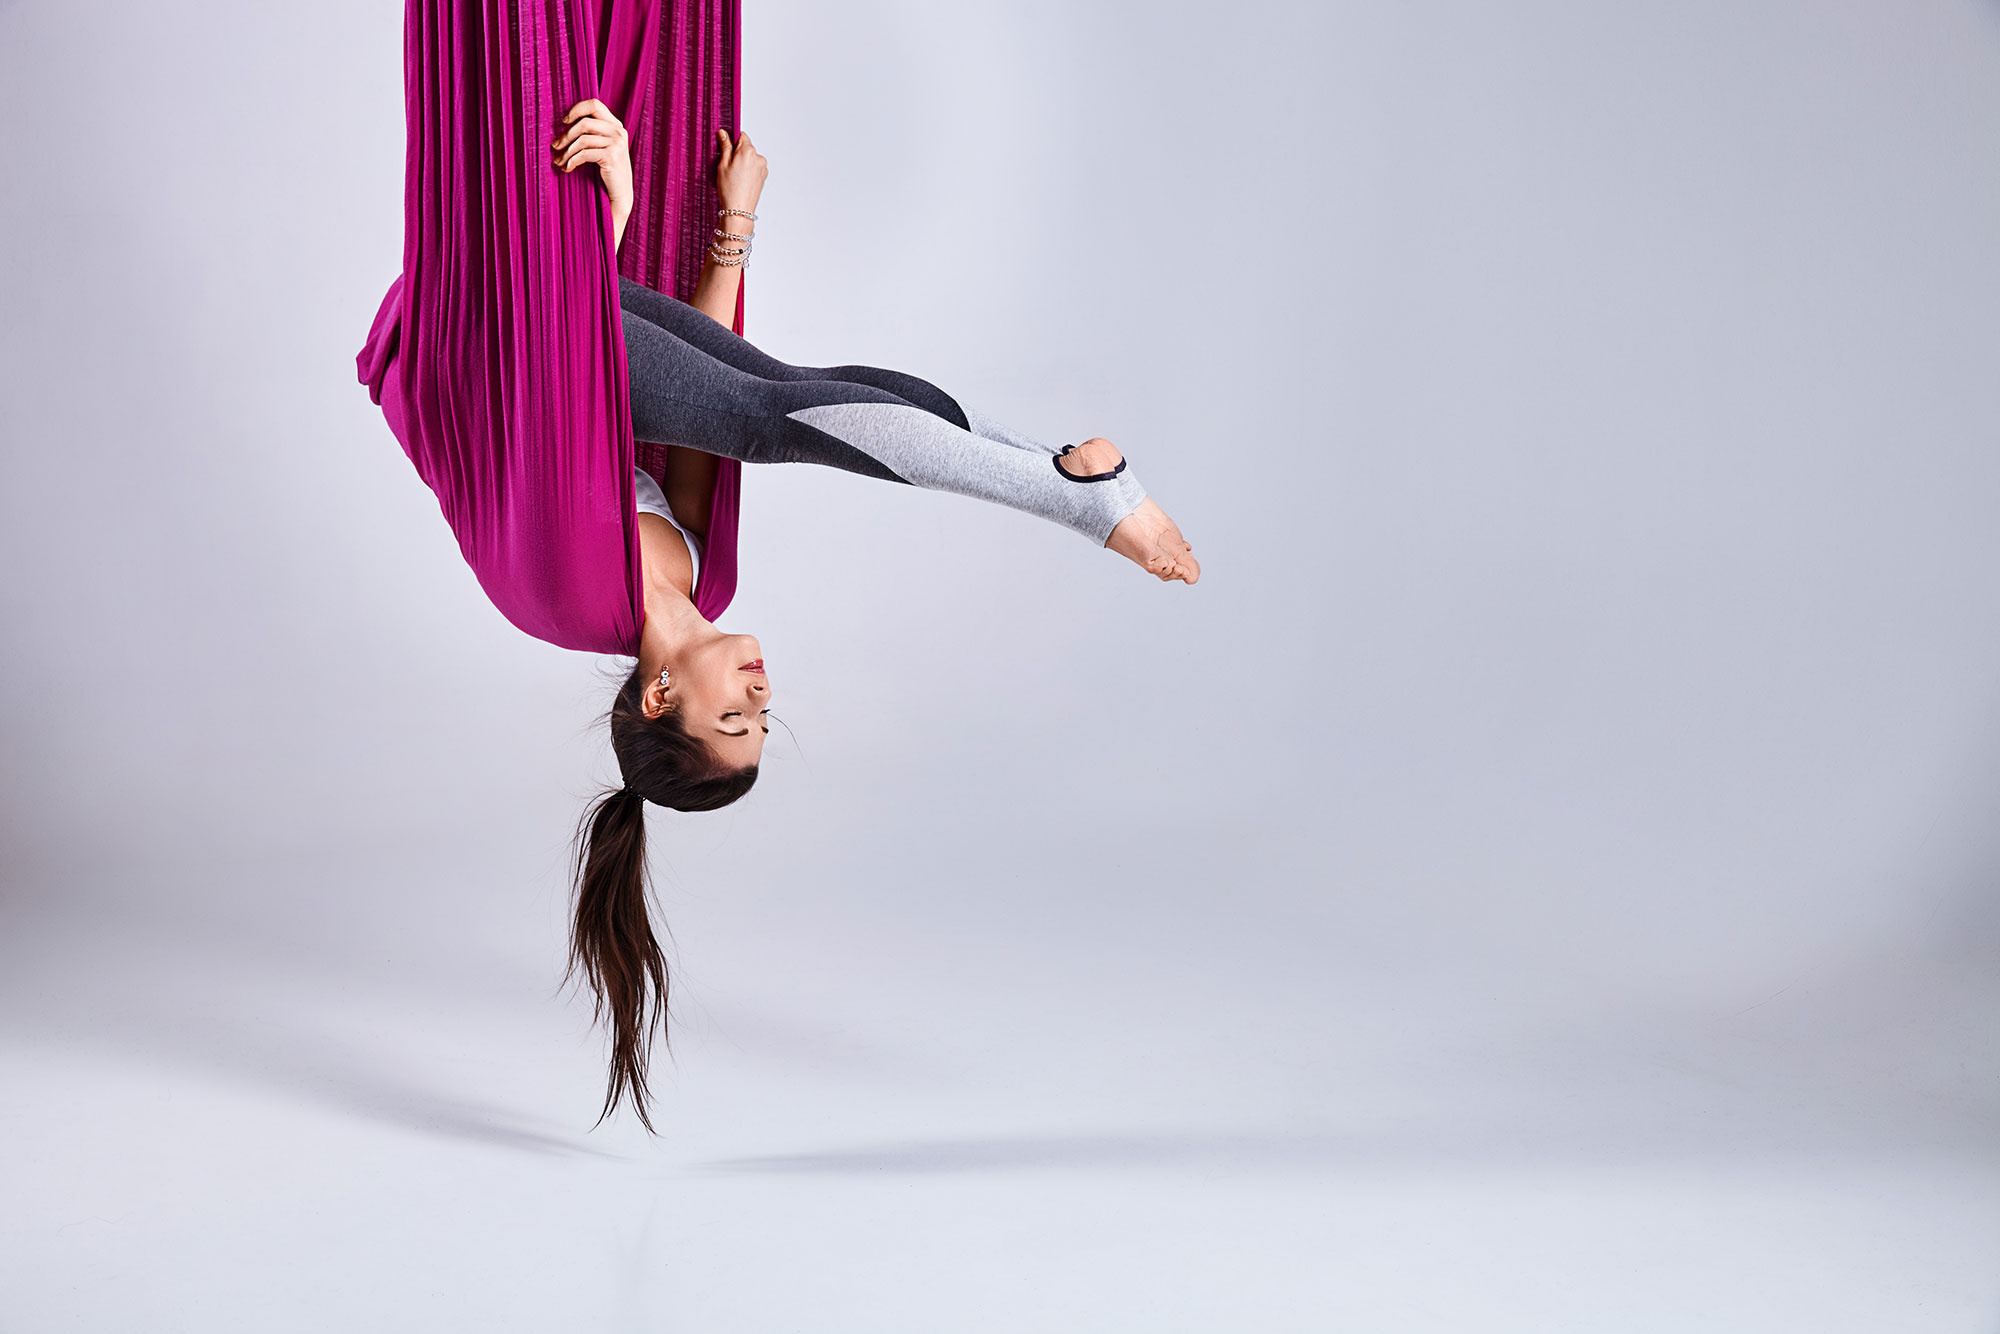 Aerial Silks: Yoga in the air training session, Recreational activity and sport. 2000x1340 HD Wallpaper.